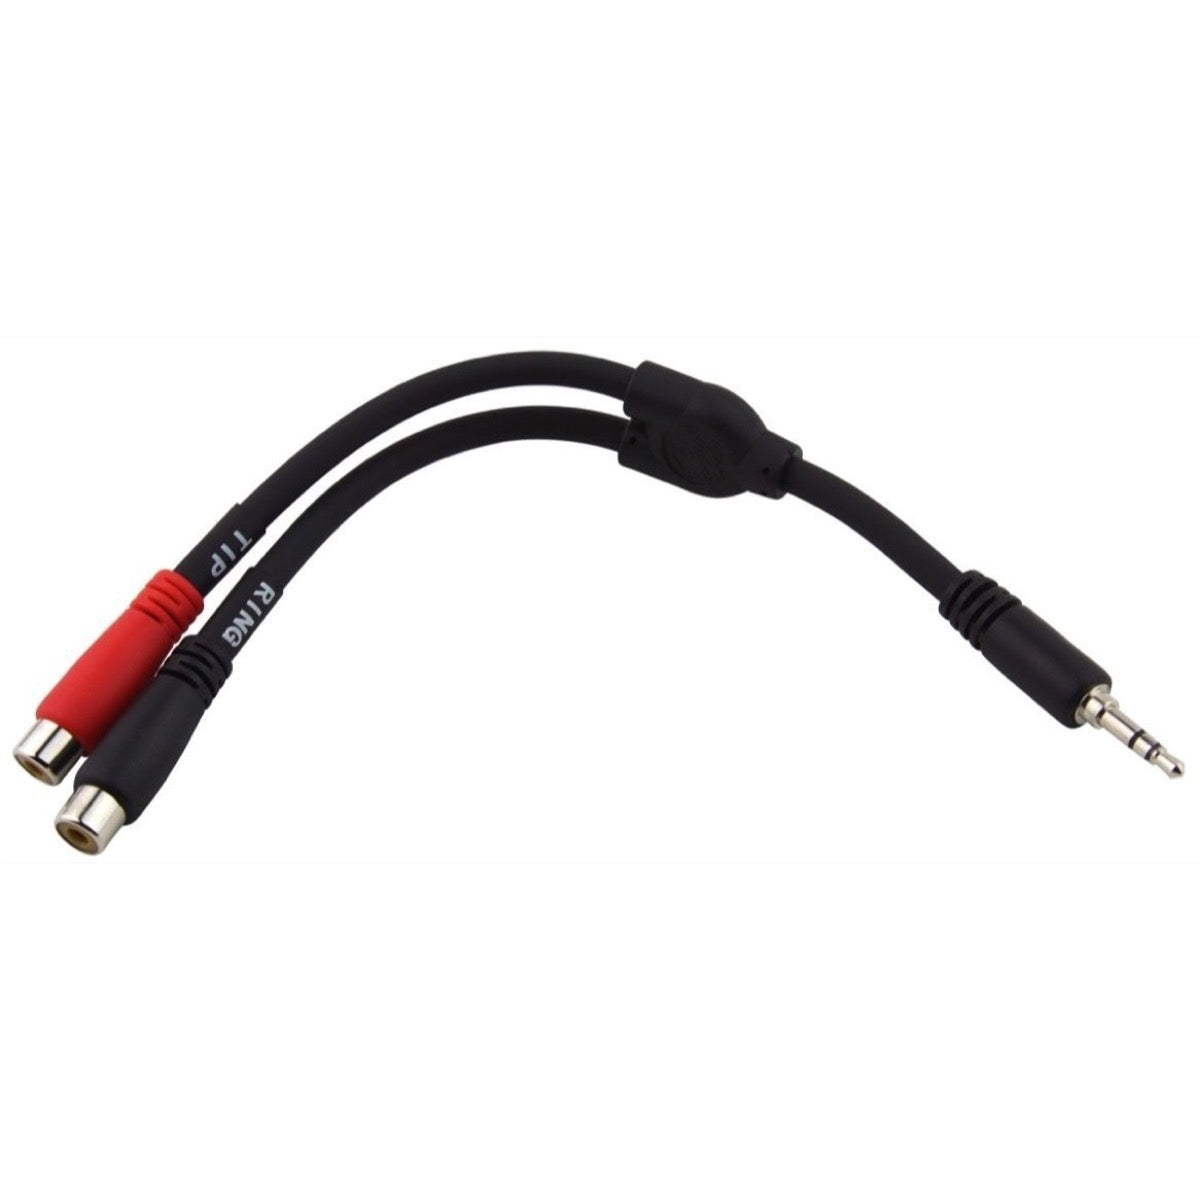 Pig Hog Stereo 1/8 Inch to Dual RCA Y-Cable, 6 Inch